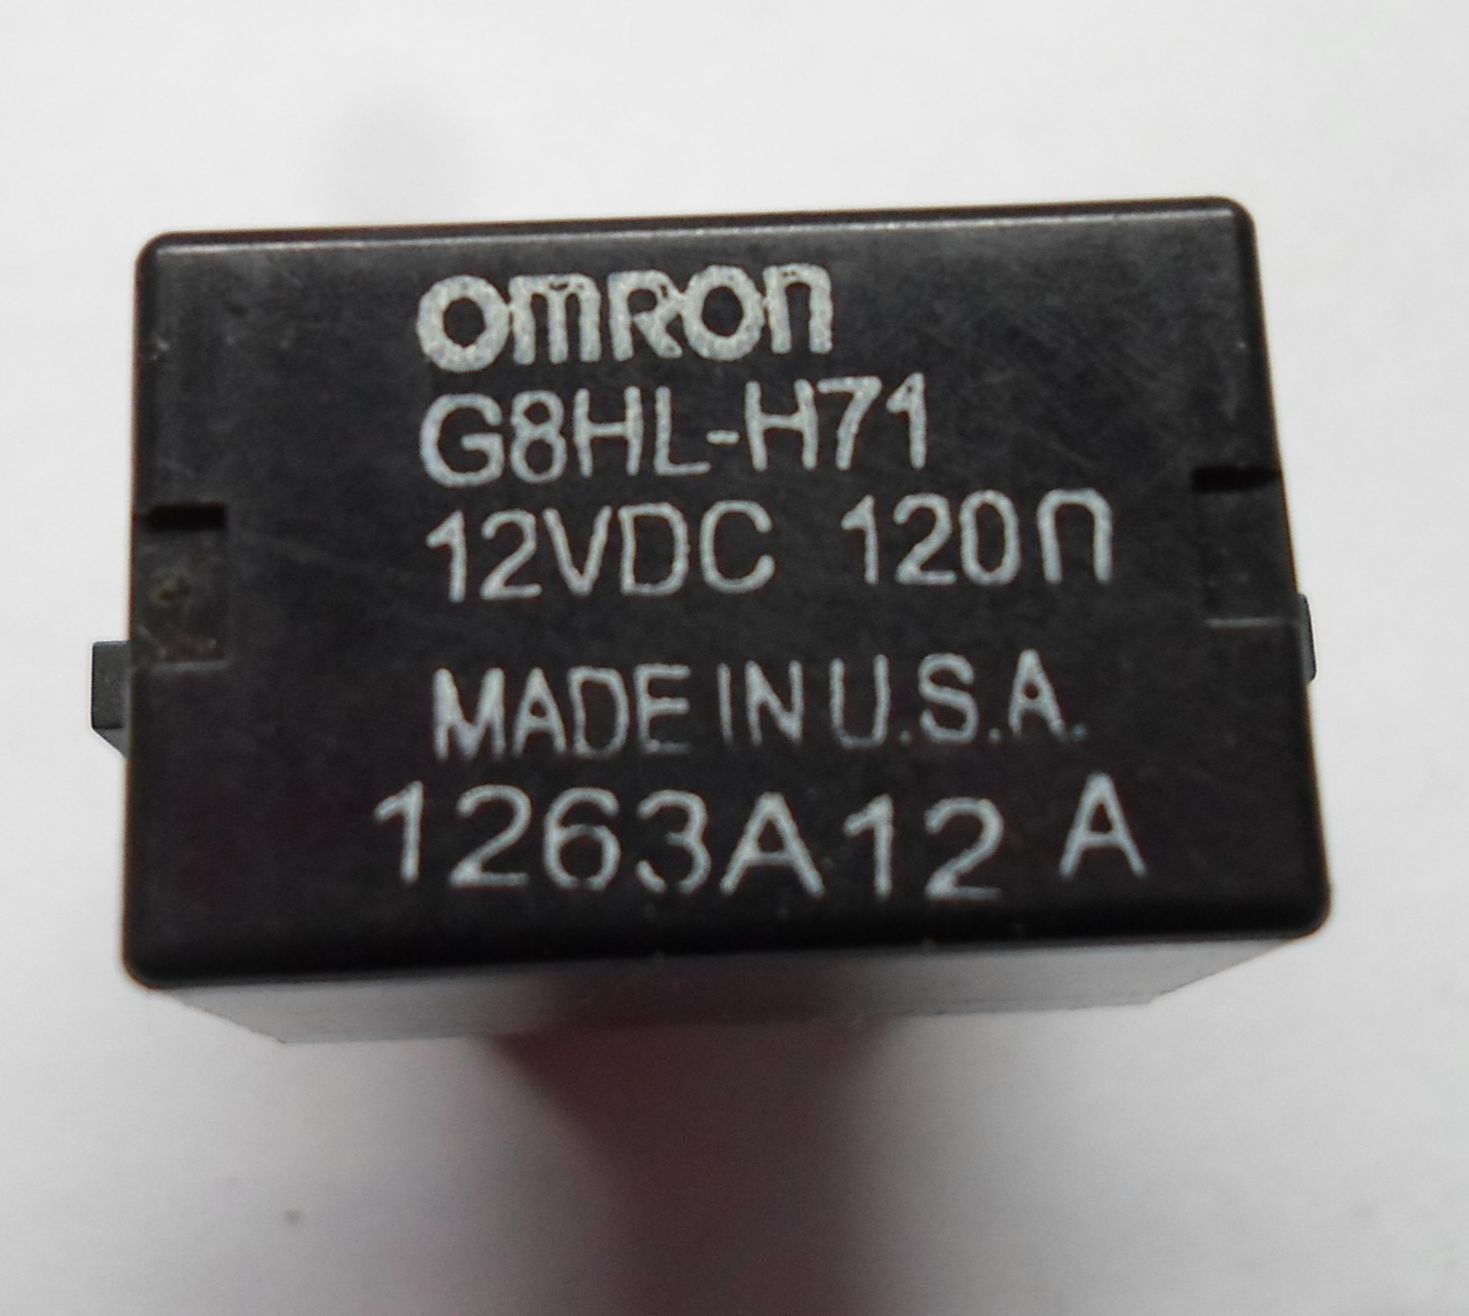 HONDA OMRON RELAY G8HL-H71  OEM FREE FAST SHIPPING 6 MONTH WARRANTY! H4